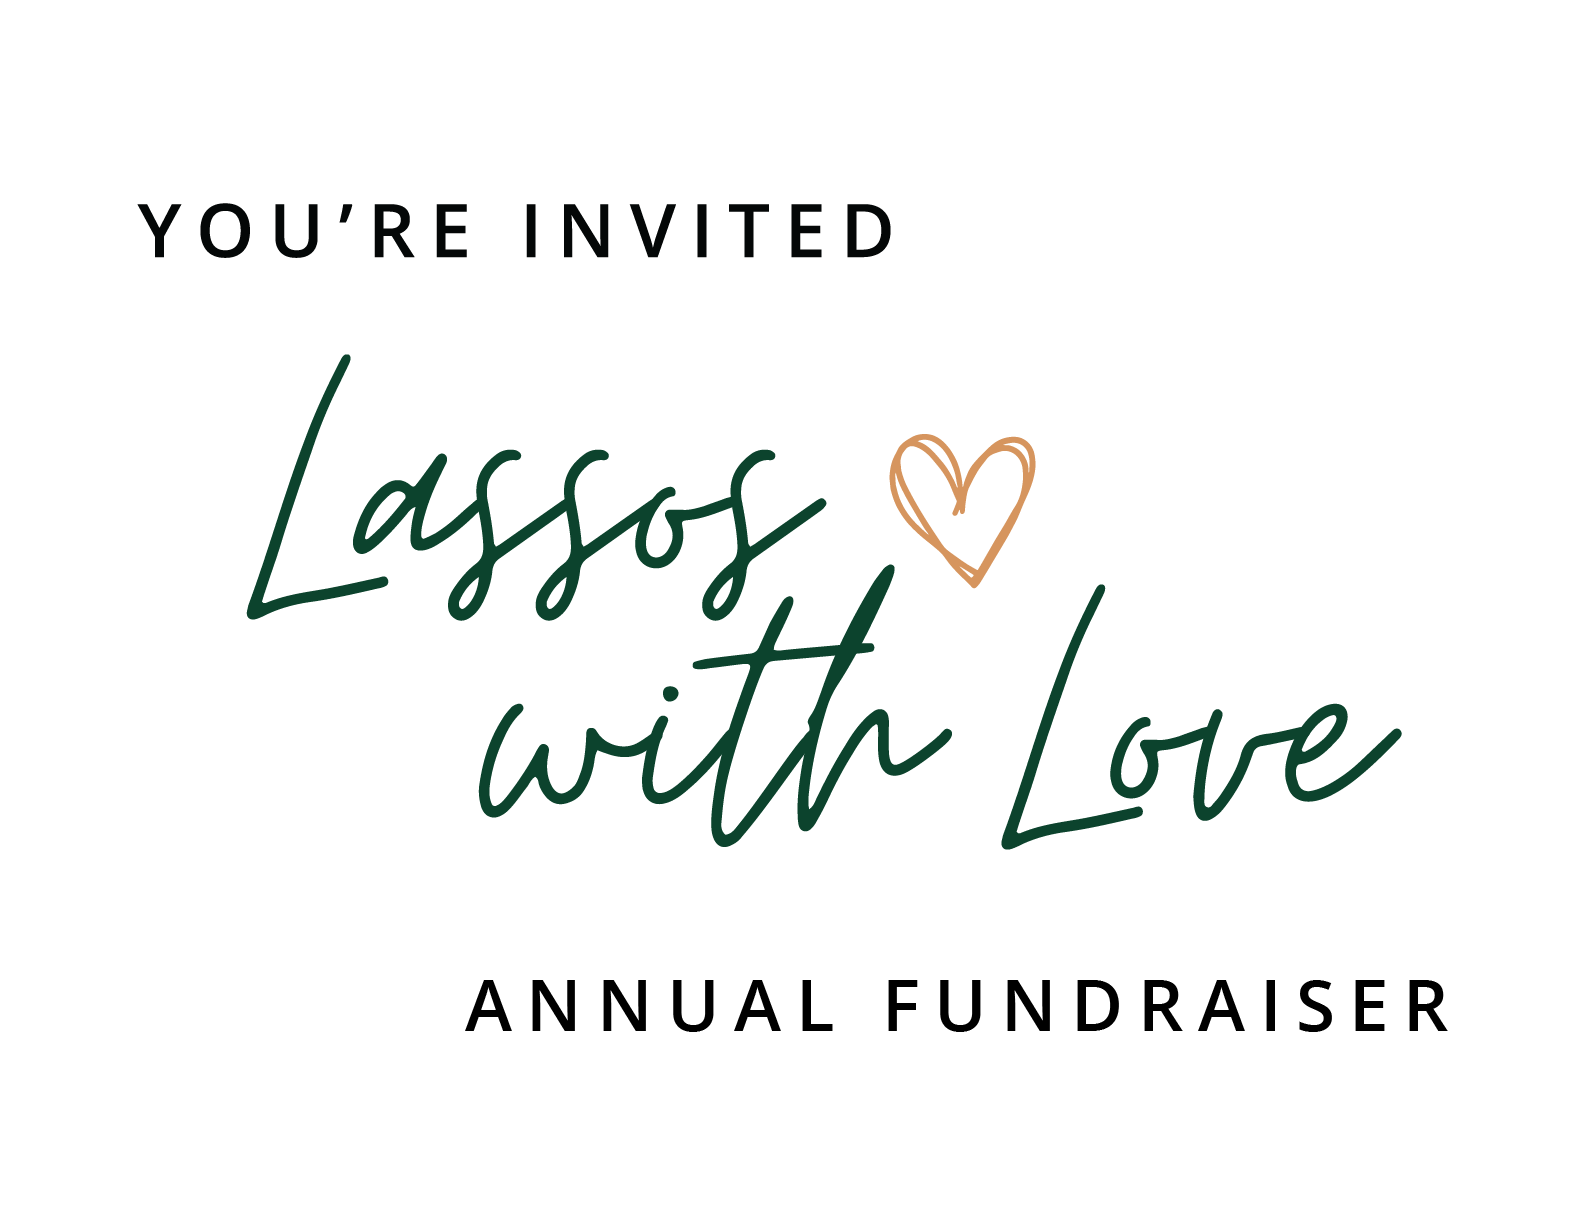 You're invited - Lassos with Love - Annual Fundraiser